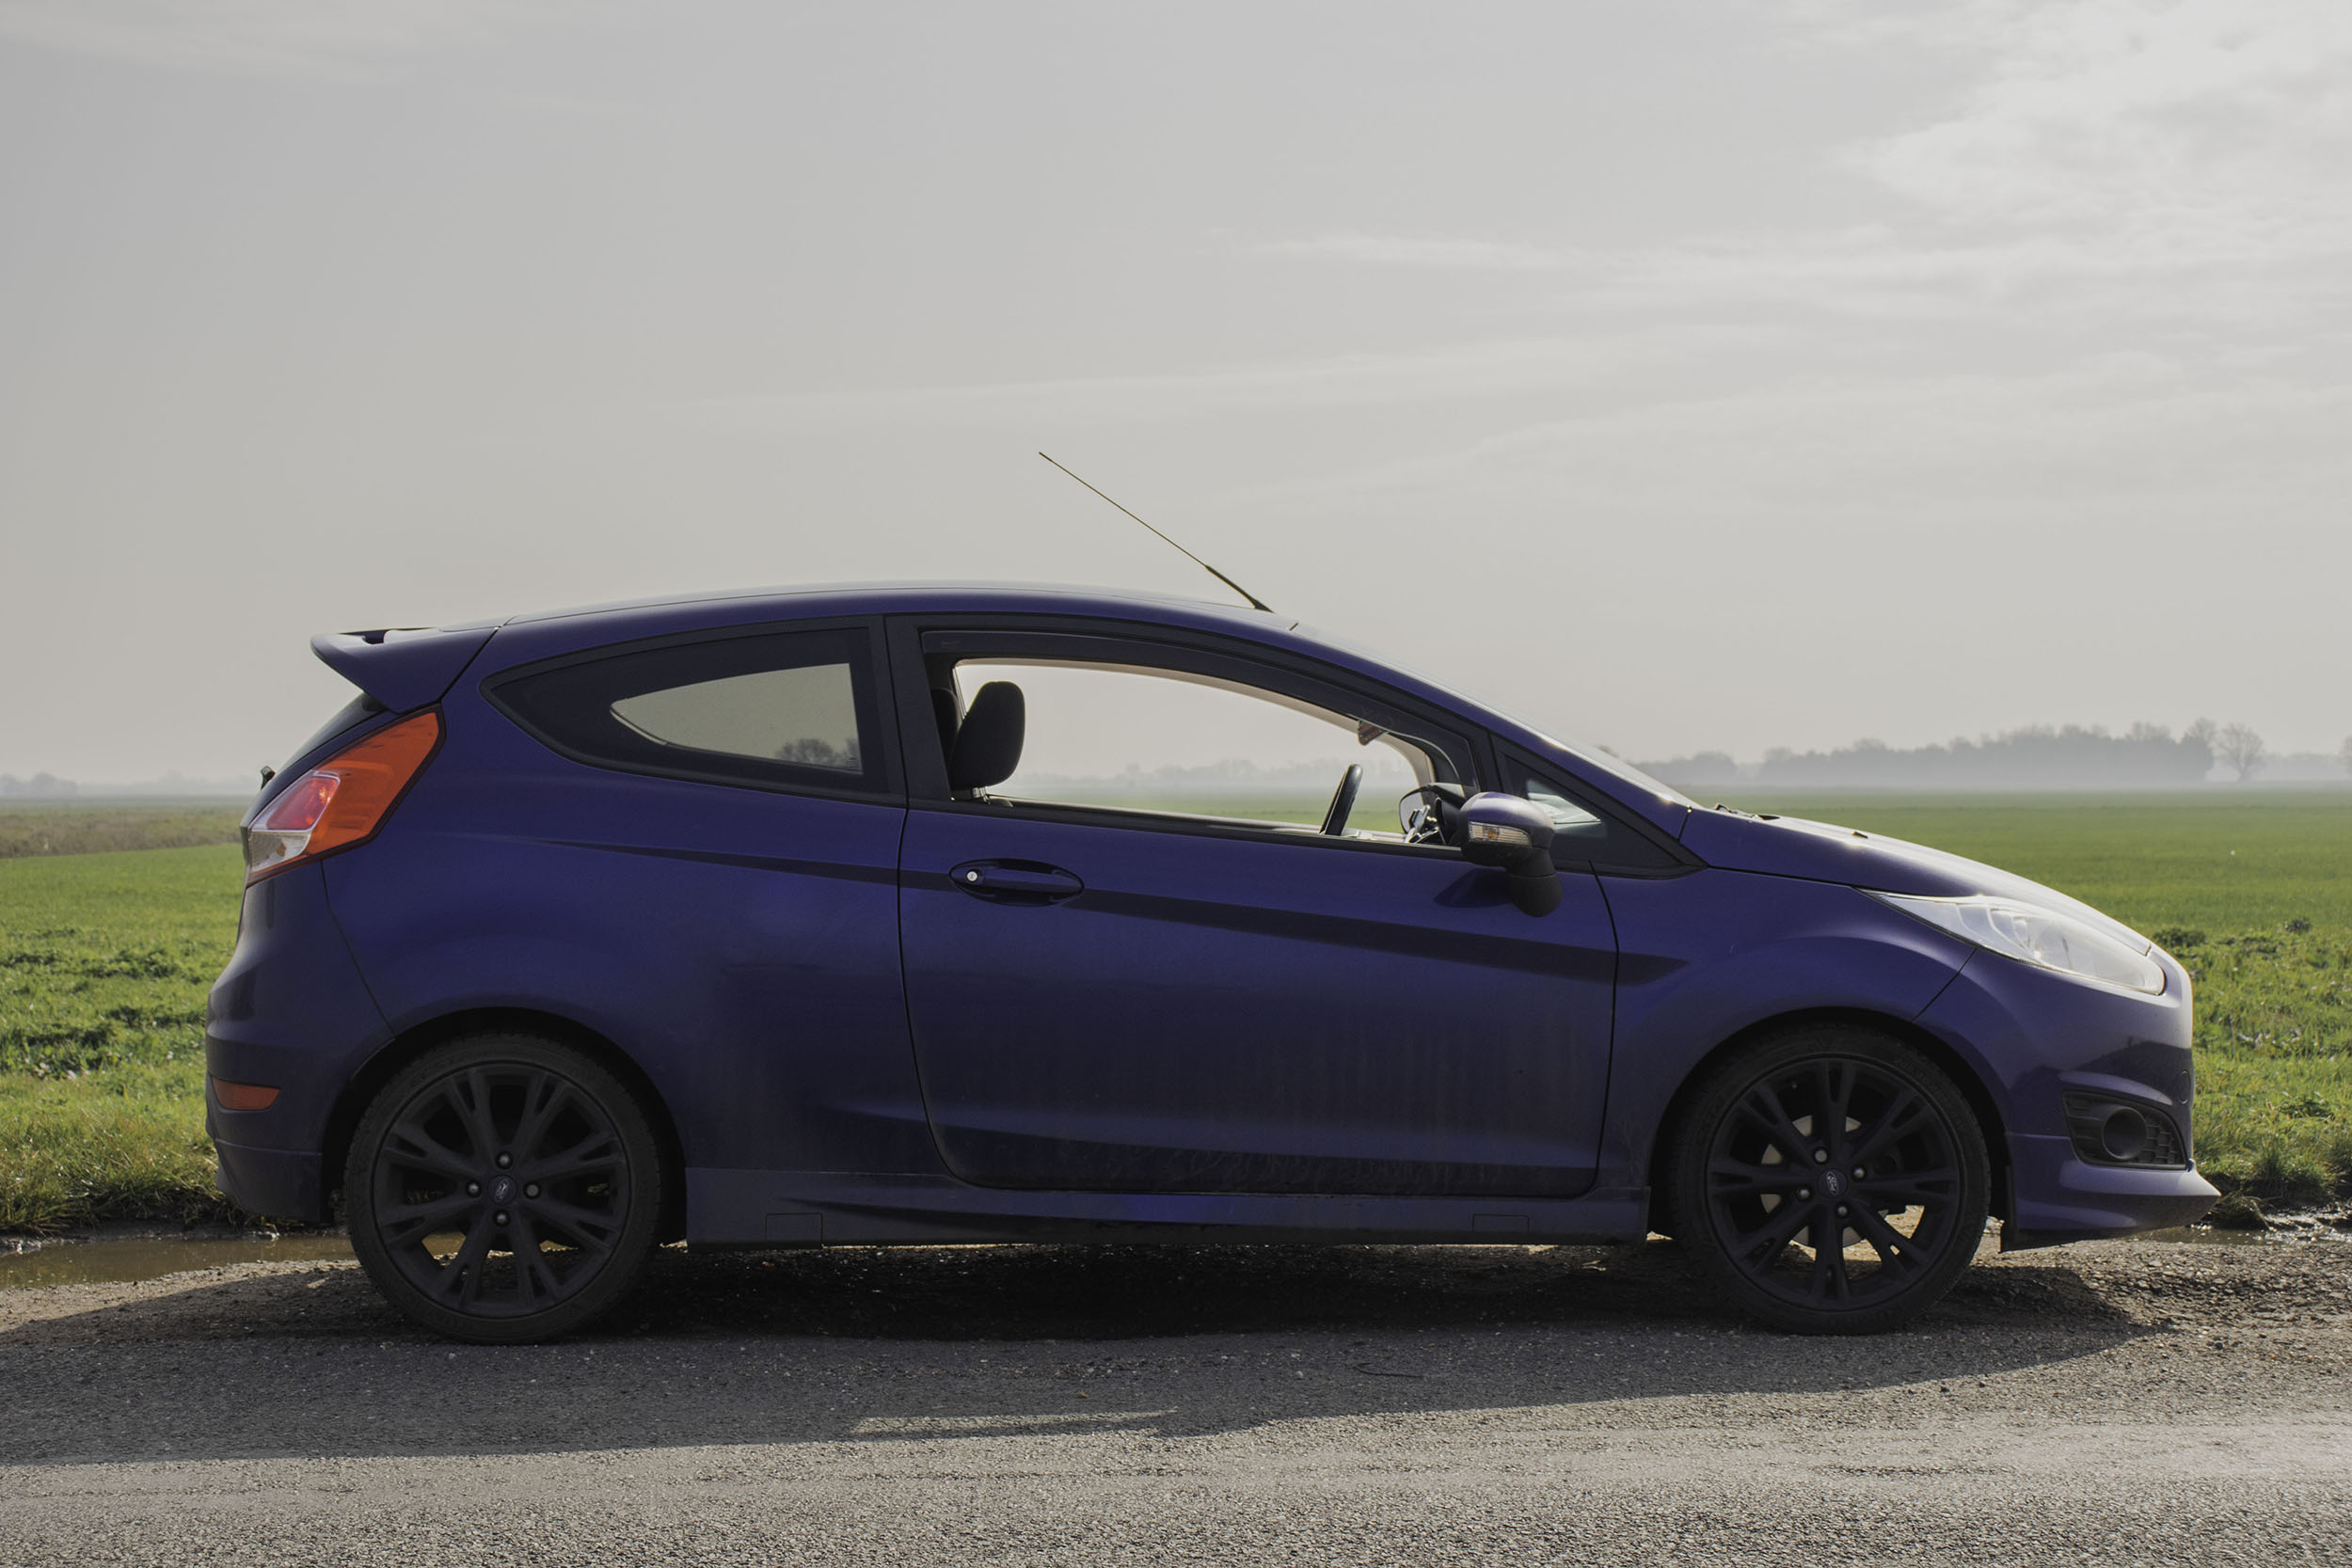 BA Photography work by Georgia Wilding-Glendye showing the exterior of a Ford Fiesta ZS as the landscape behind is filled with mist.